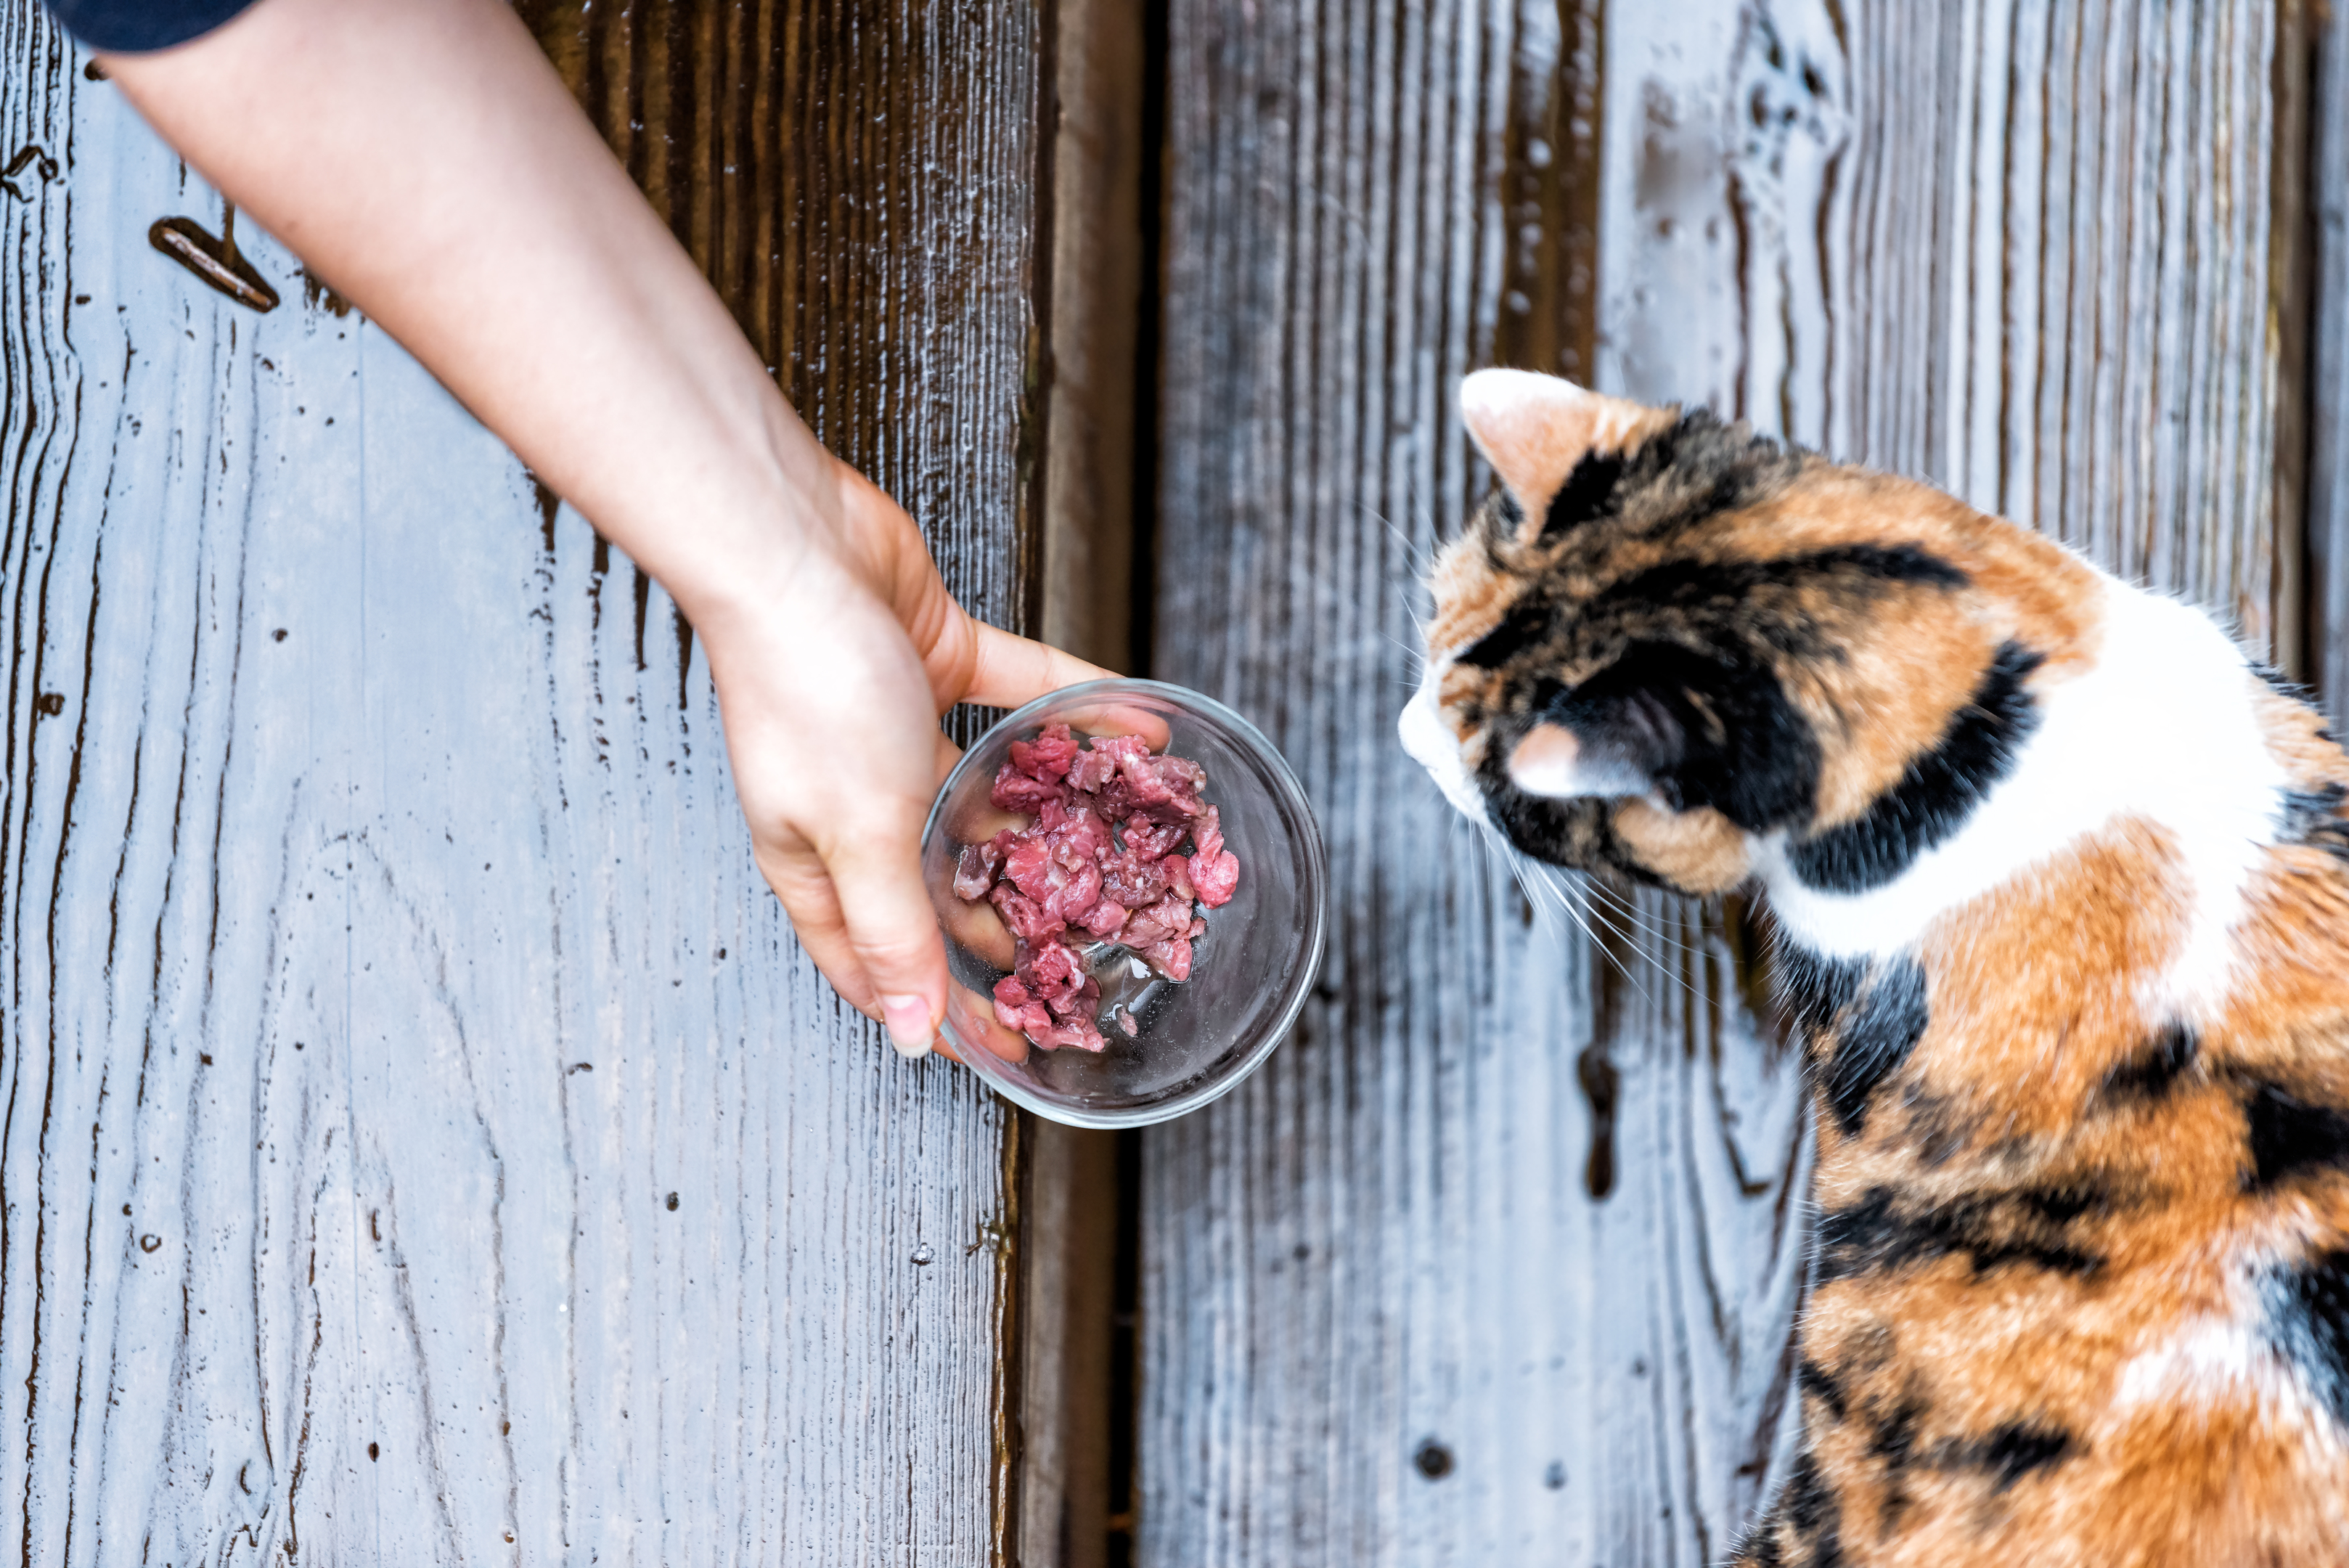 Calico homeless stray cat curious exploring house backyard by wooden deck, garden, wet wood territory, smelling scent sniffing woman hand girl feeding bowl of meat food